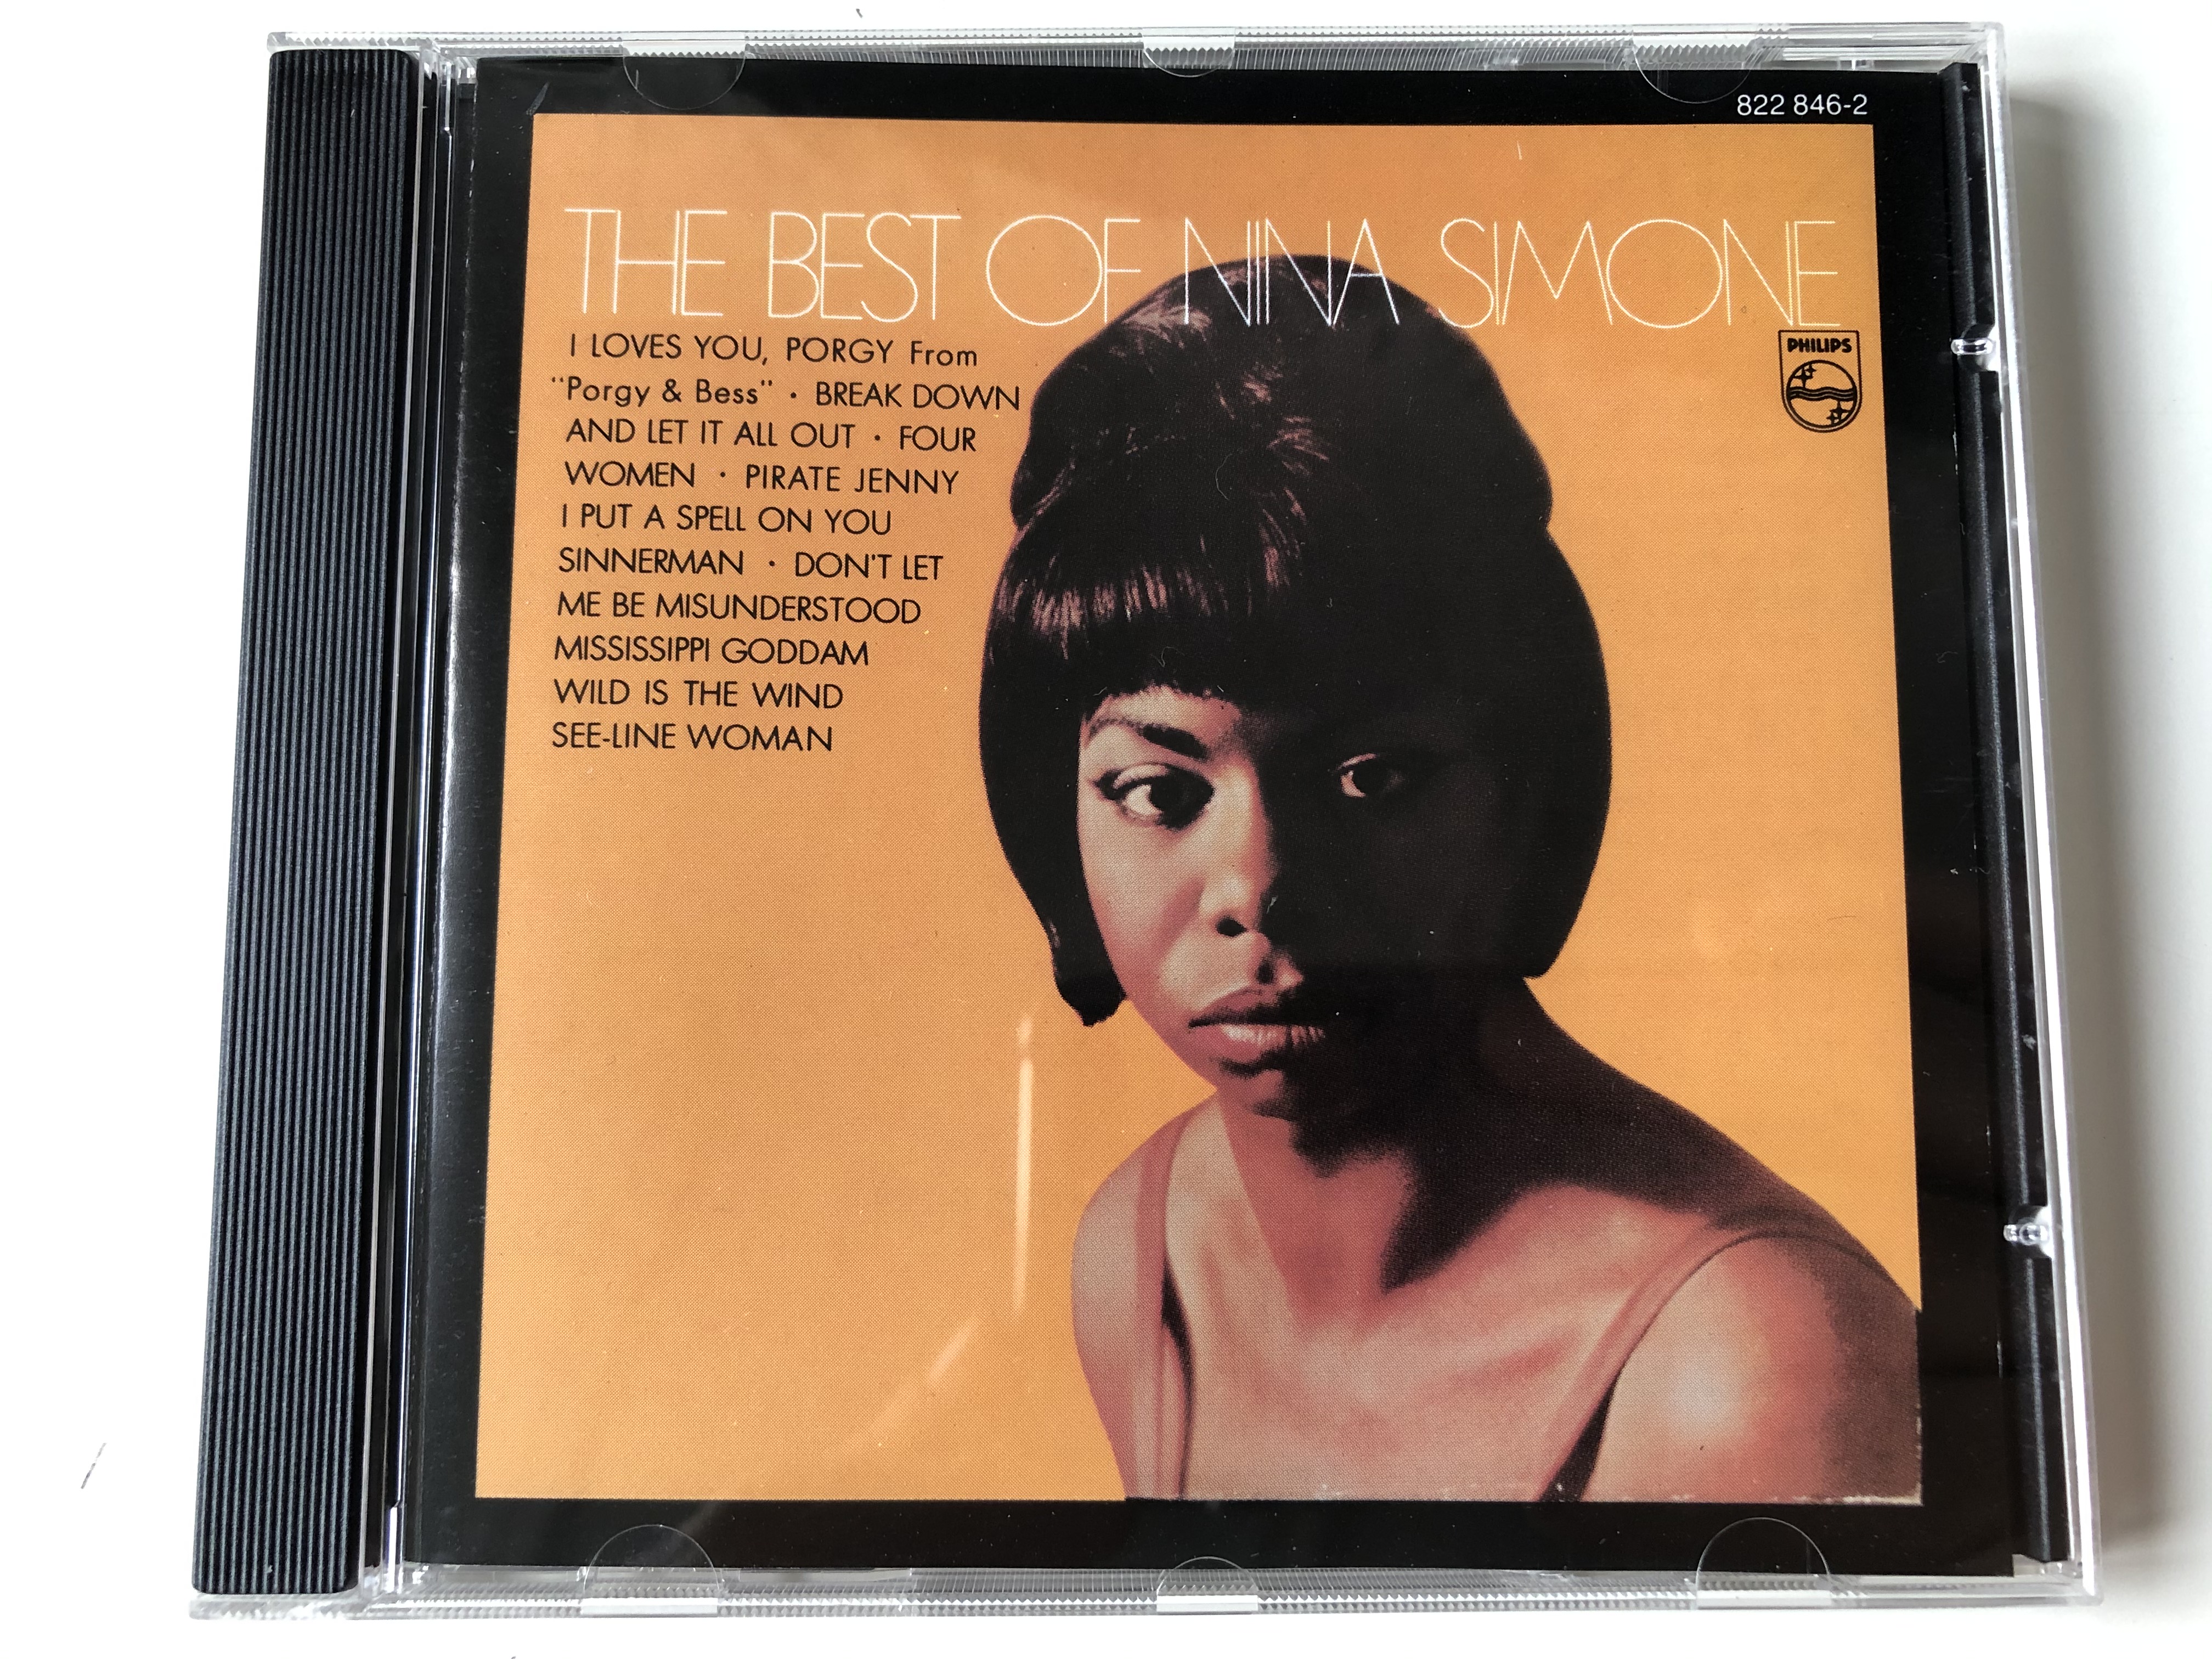 the-best-of-nina-simone-i-loves-you-porgy-from-porgy-bess-break-down-and-let-it-all-out-four-women-pirate-jenny-i-put-a-spell-on-you-sinnerman-don-t-let-me-be-misunderstood-missi-1-.jpg